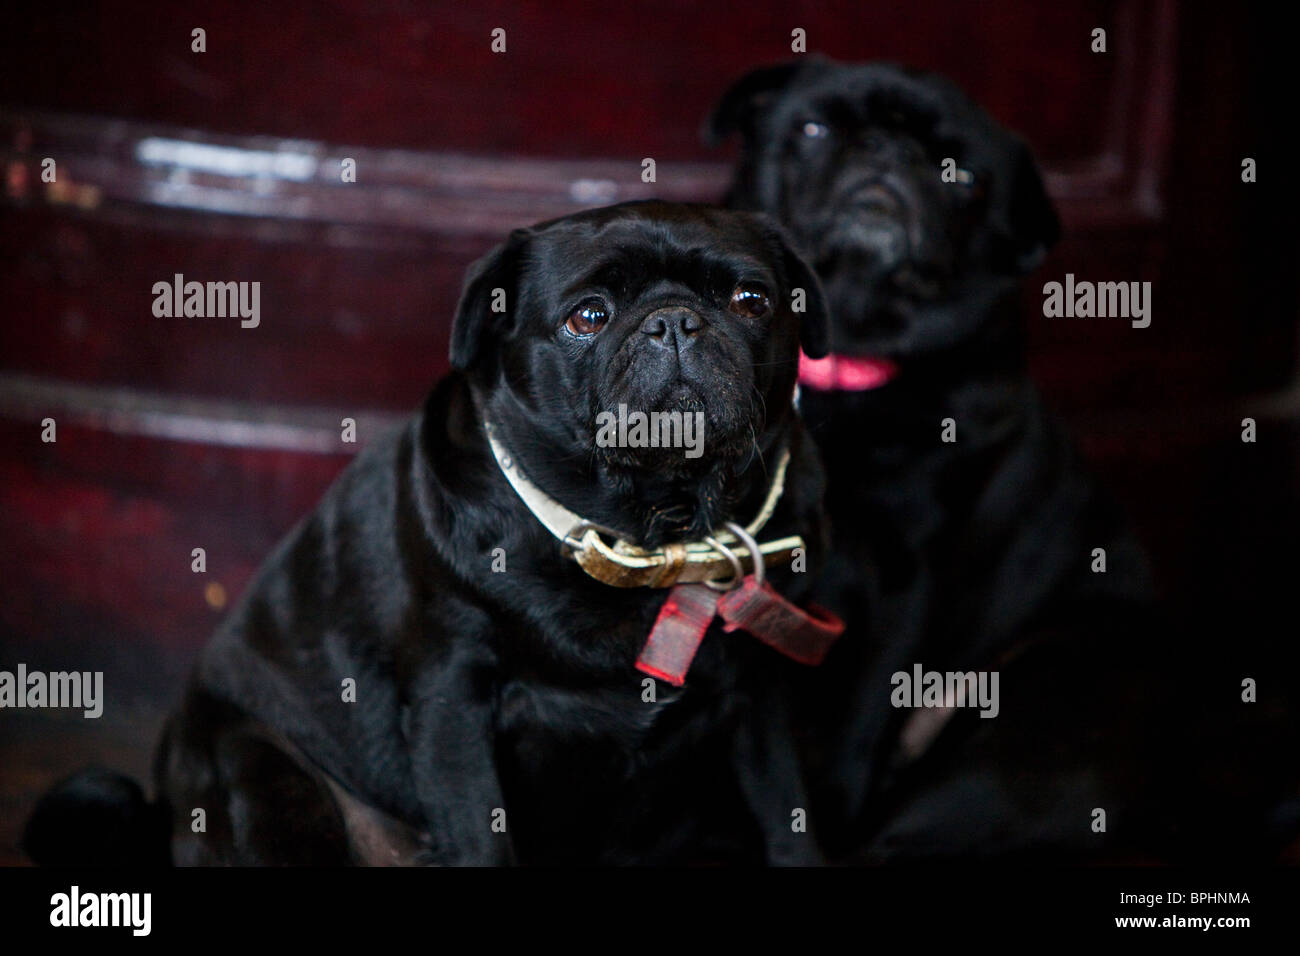 Two pet dogs looking bored Stock Photo